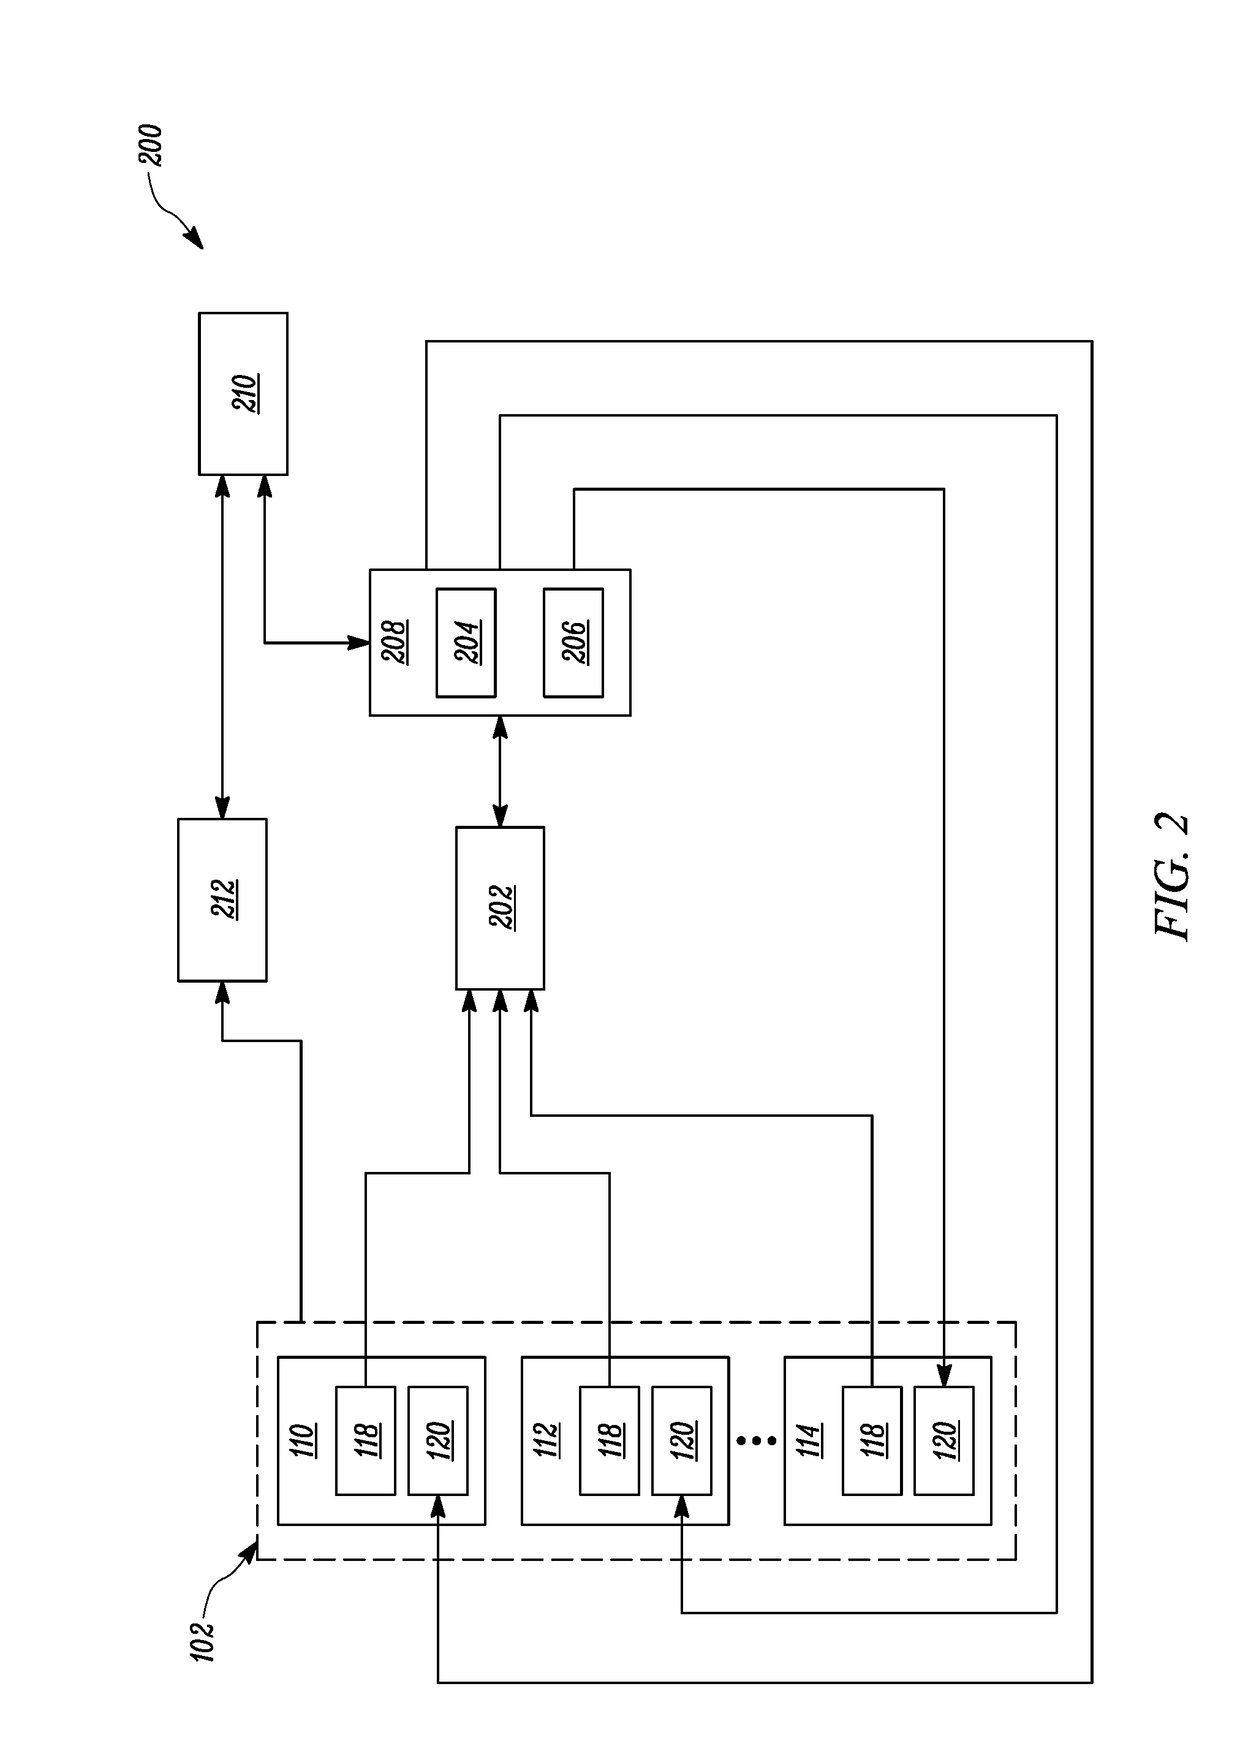 Project management system for worksite including machines performing operations and method thereof